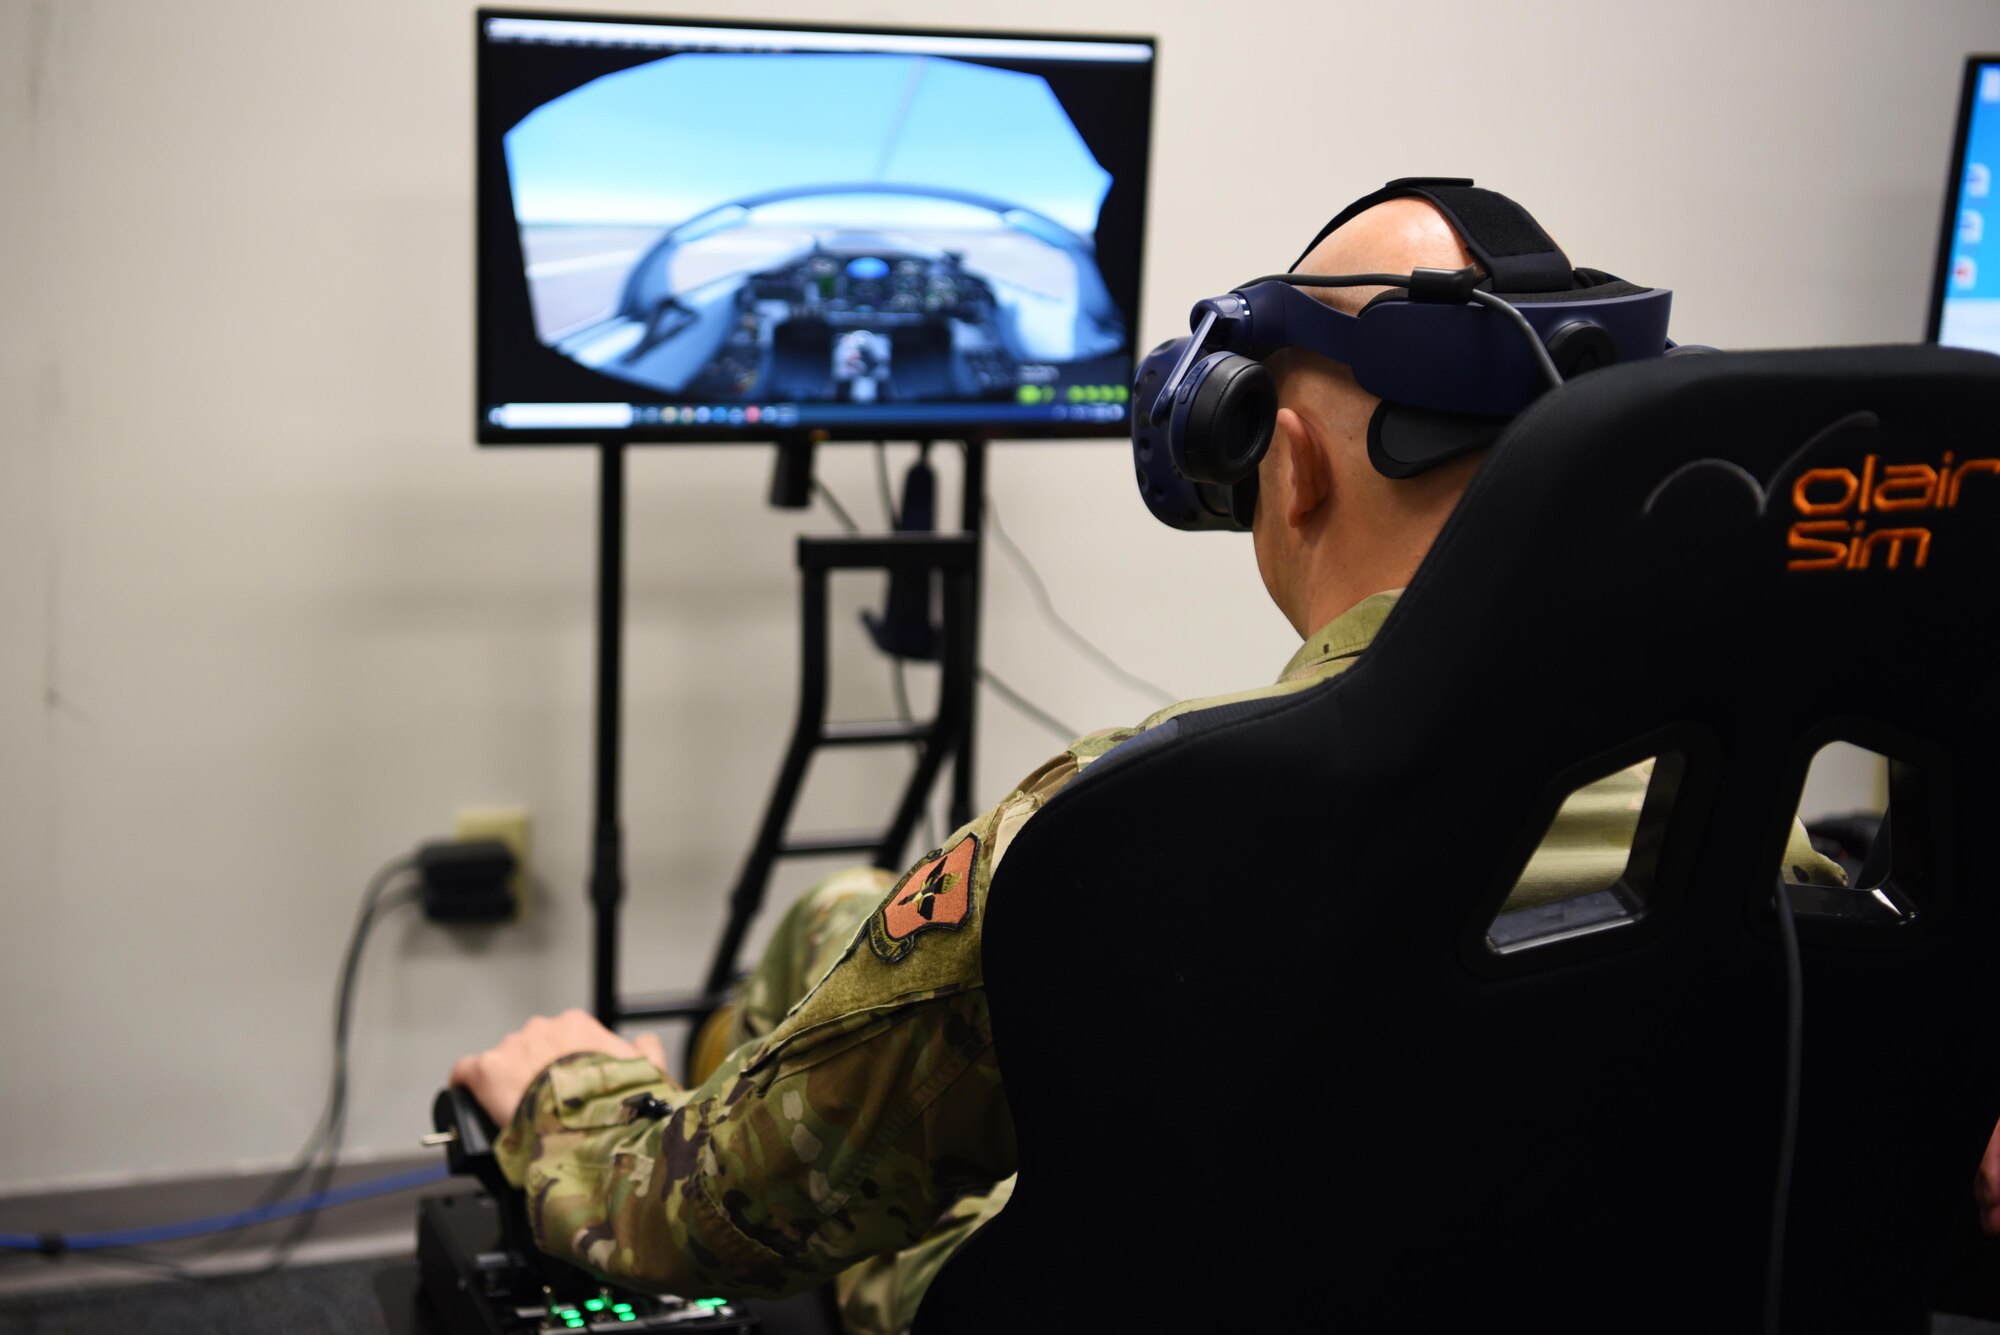 Chief Master Sgt. Trevor James, 14th Flying Training Wing command chief, operates a T-6 Texan II virtual reality simulator, Jan. 16, 2020, on Columbus Air Force Base, Miss. The virtual reality flight simulations help student pilots learn and improve on their existing skills through simulated flight exercises including taking off, landing, and flight patterns. (U.S. Air Force photo by Airman 1st Class Jake Jacobsen)